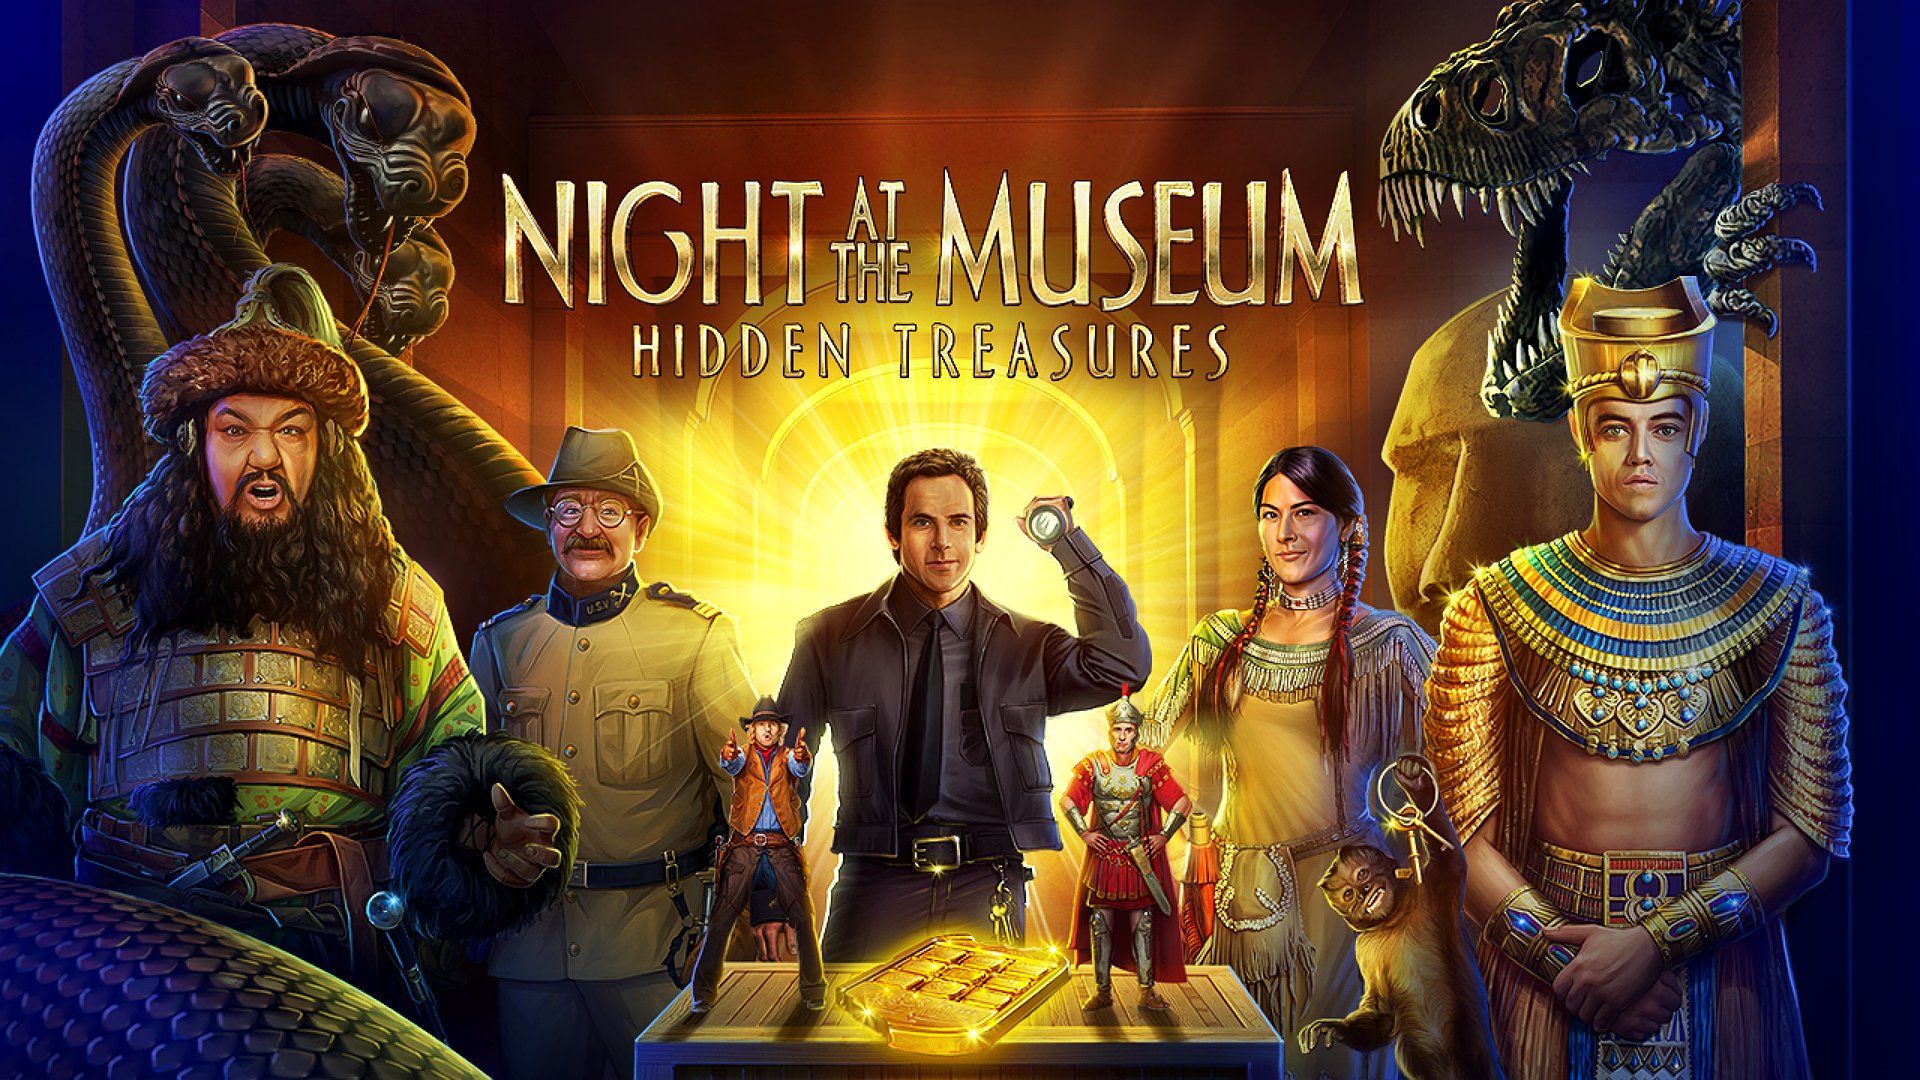 NIGHT MUSEUM action adventure comedy family fantasy 1natm poster